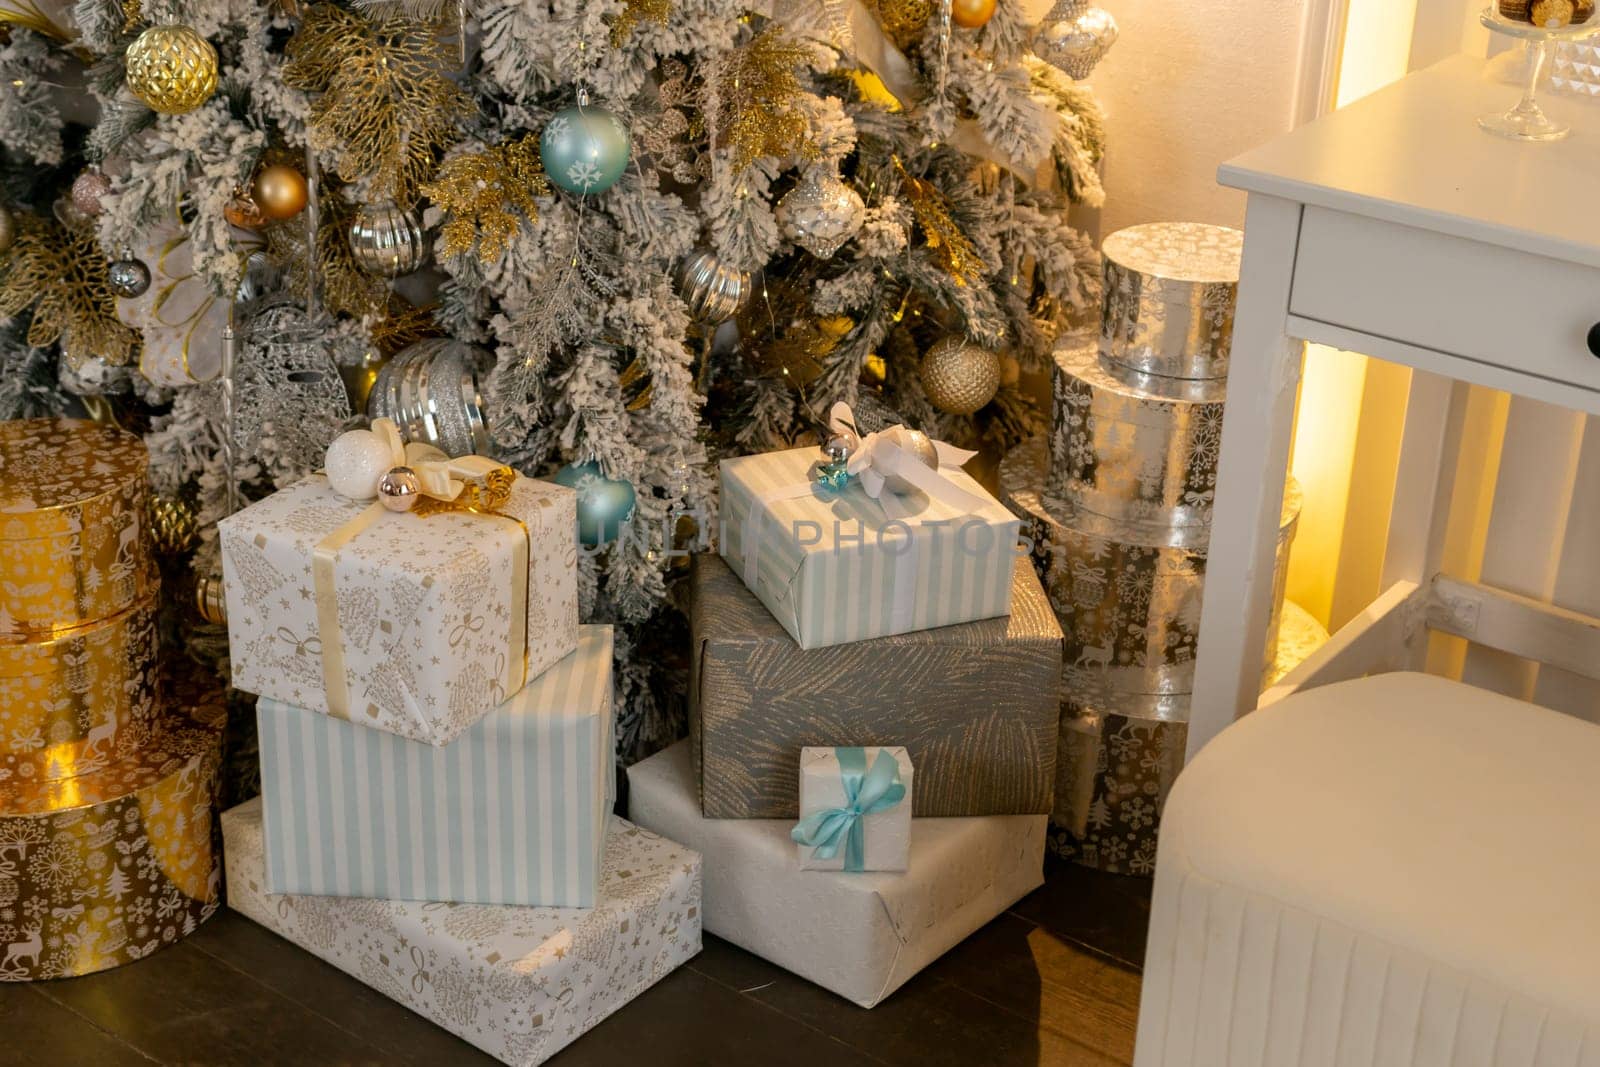 A Christmas tree with many gifts stacked on top of it. The gifts are wrapped in white paper and blue and gold ribbons. by Matiunina